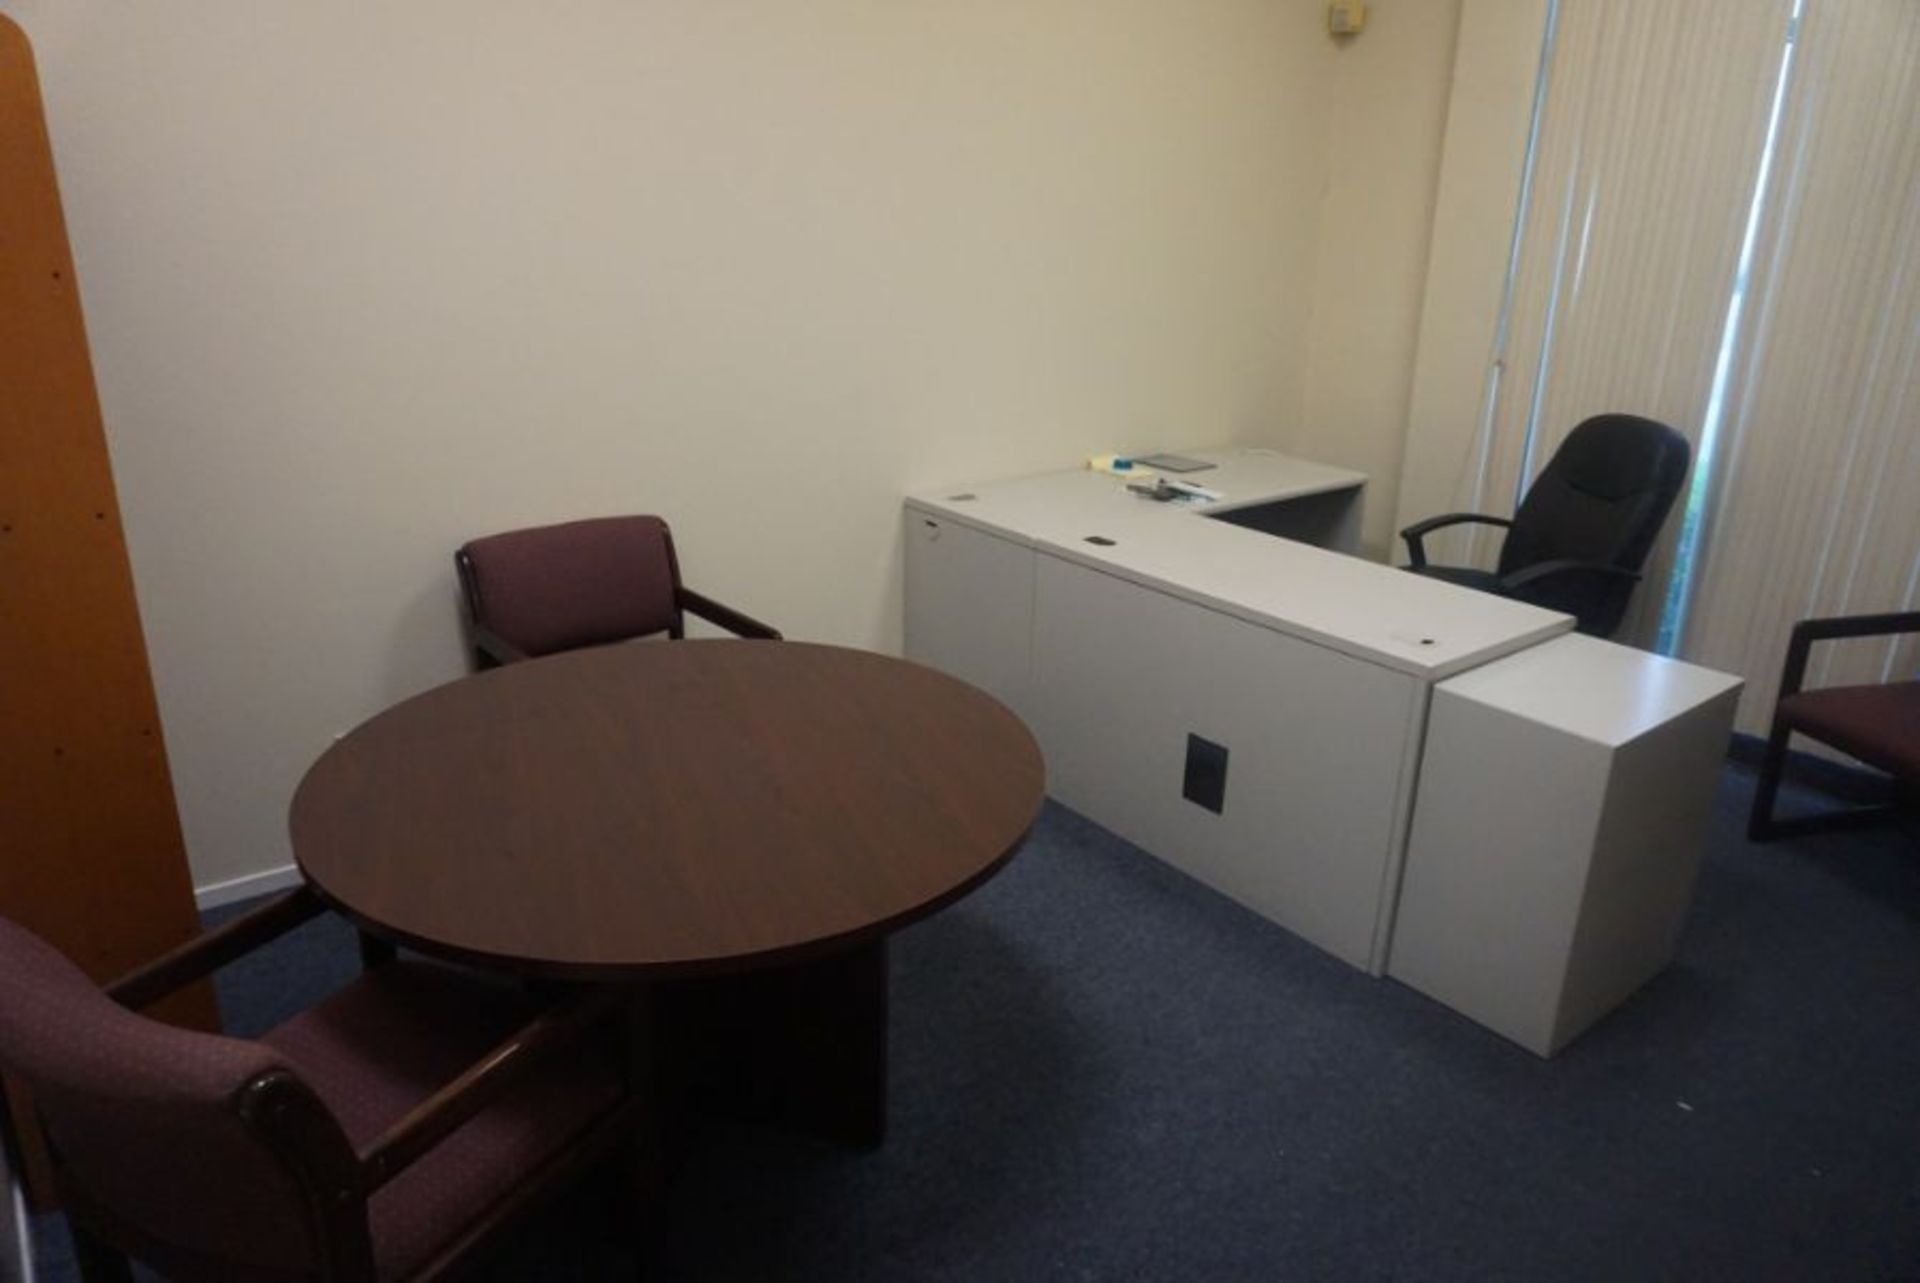 Room Content, Office Desk Chairs, and Book Shelf - Image 3 of 4